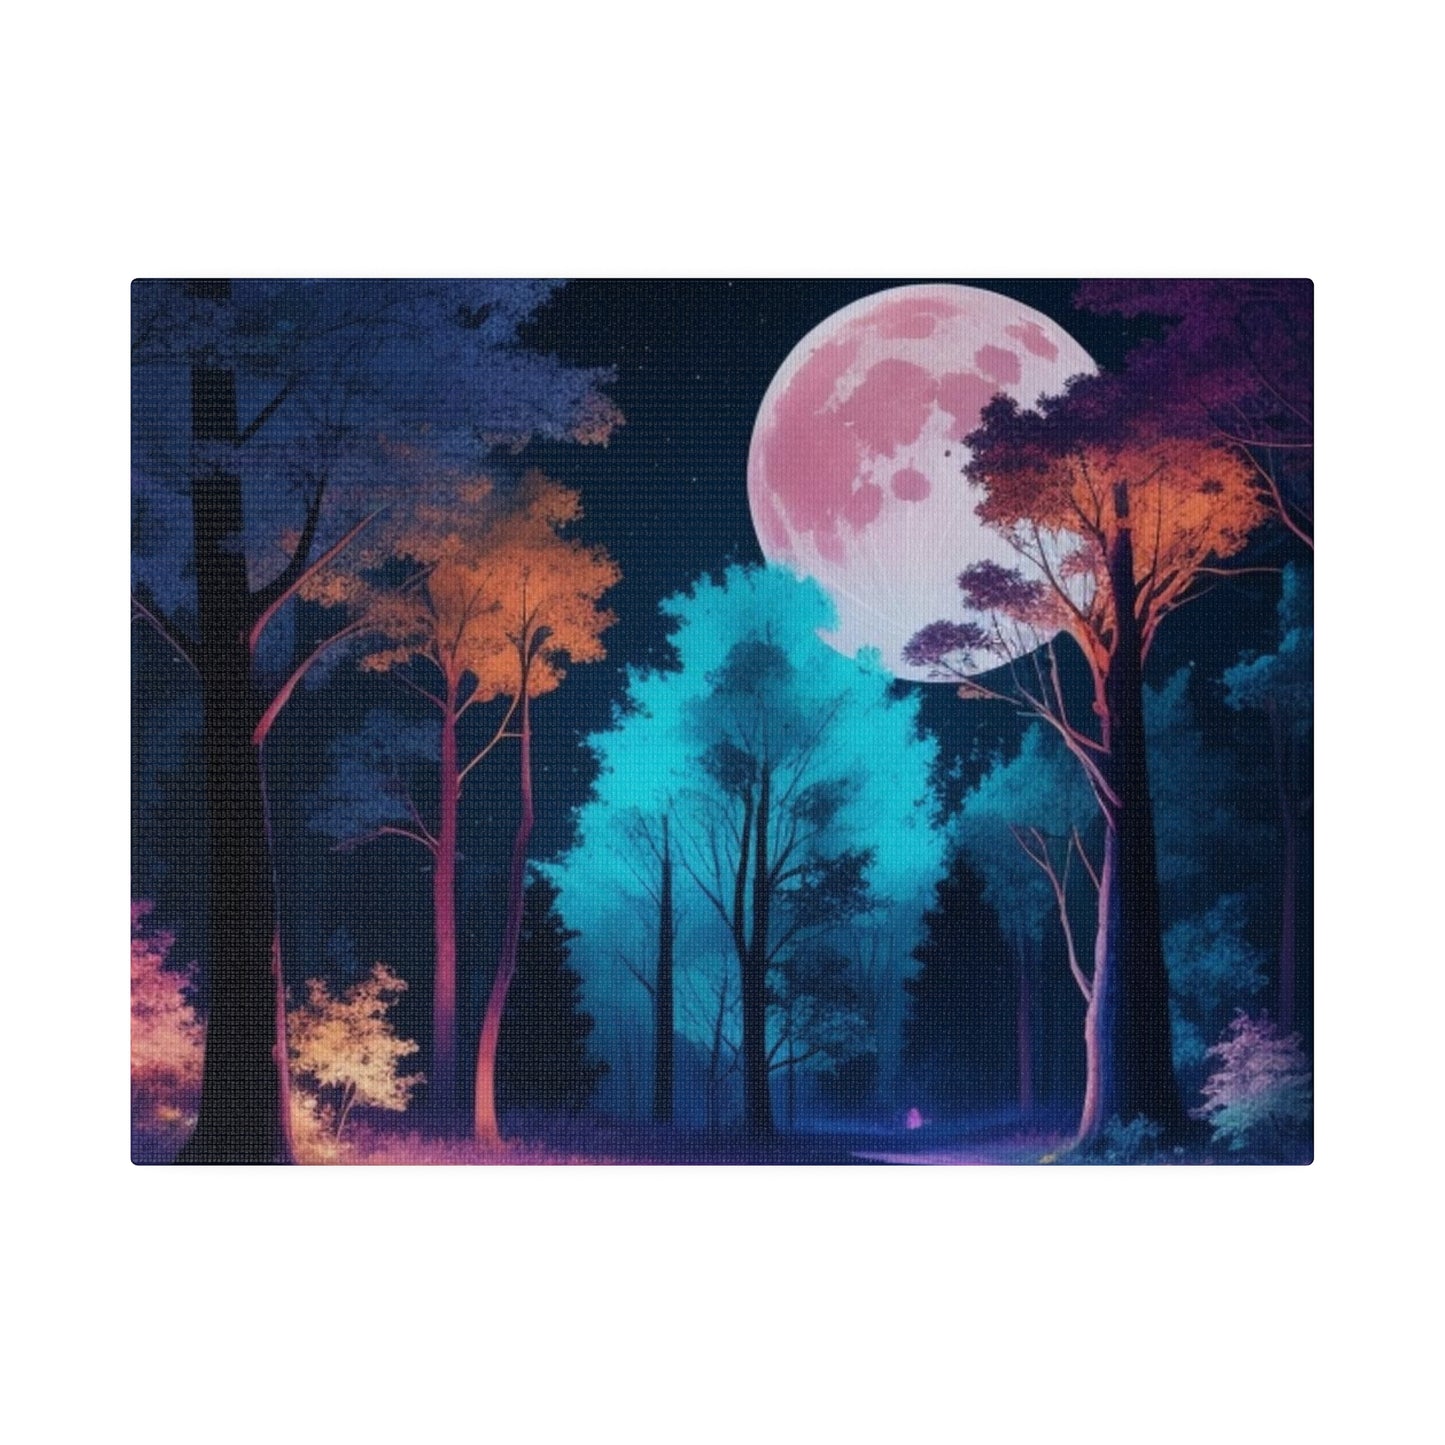 Night Time Full Moon Colourful Forest Art - Matte Canvas, Stretched, 0.75"